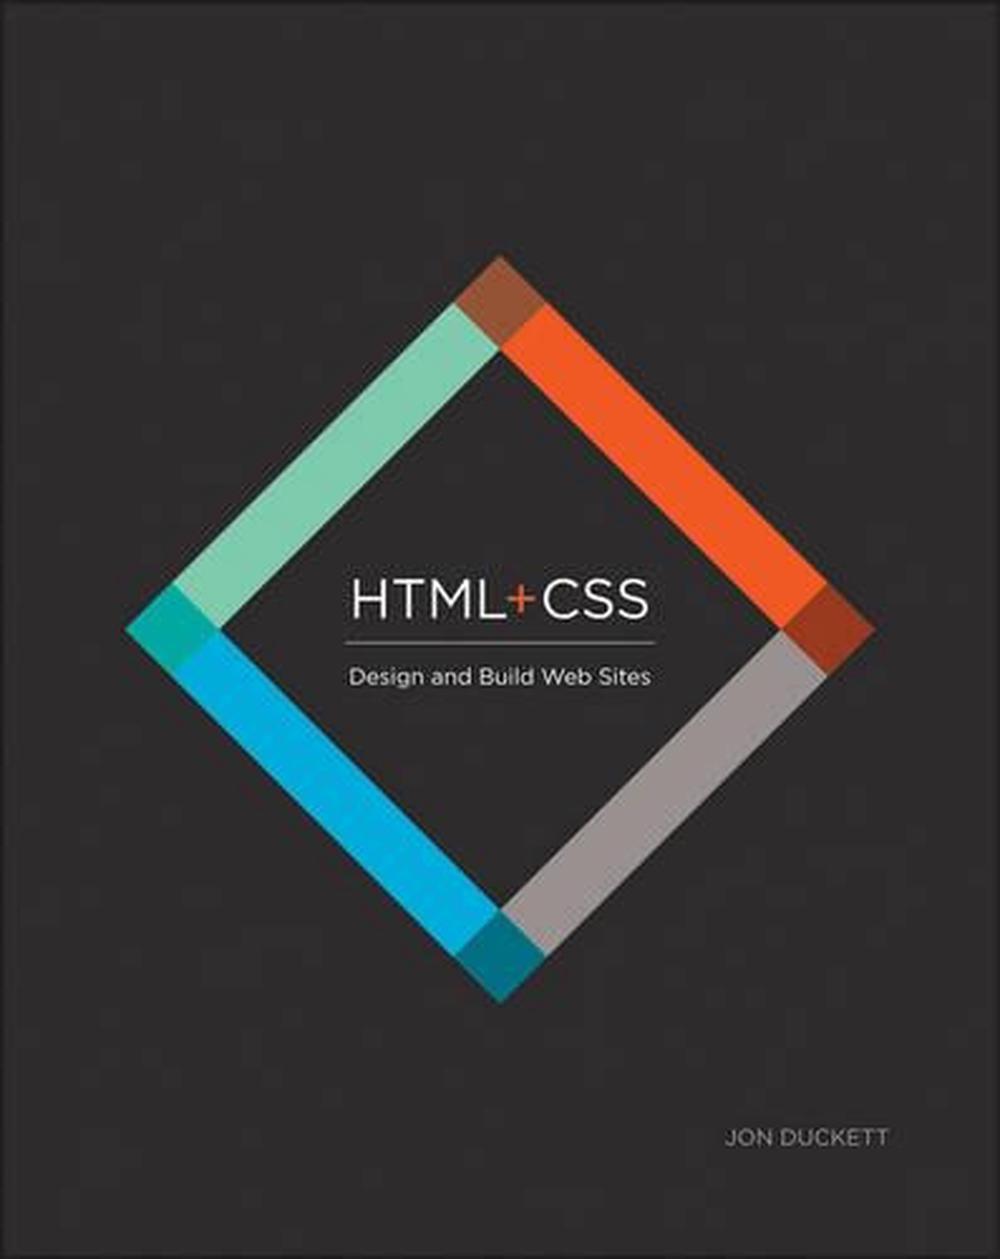 html and css design and build websites